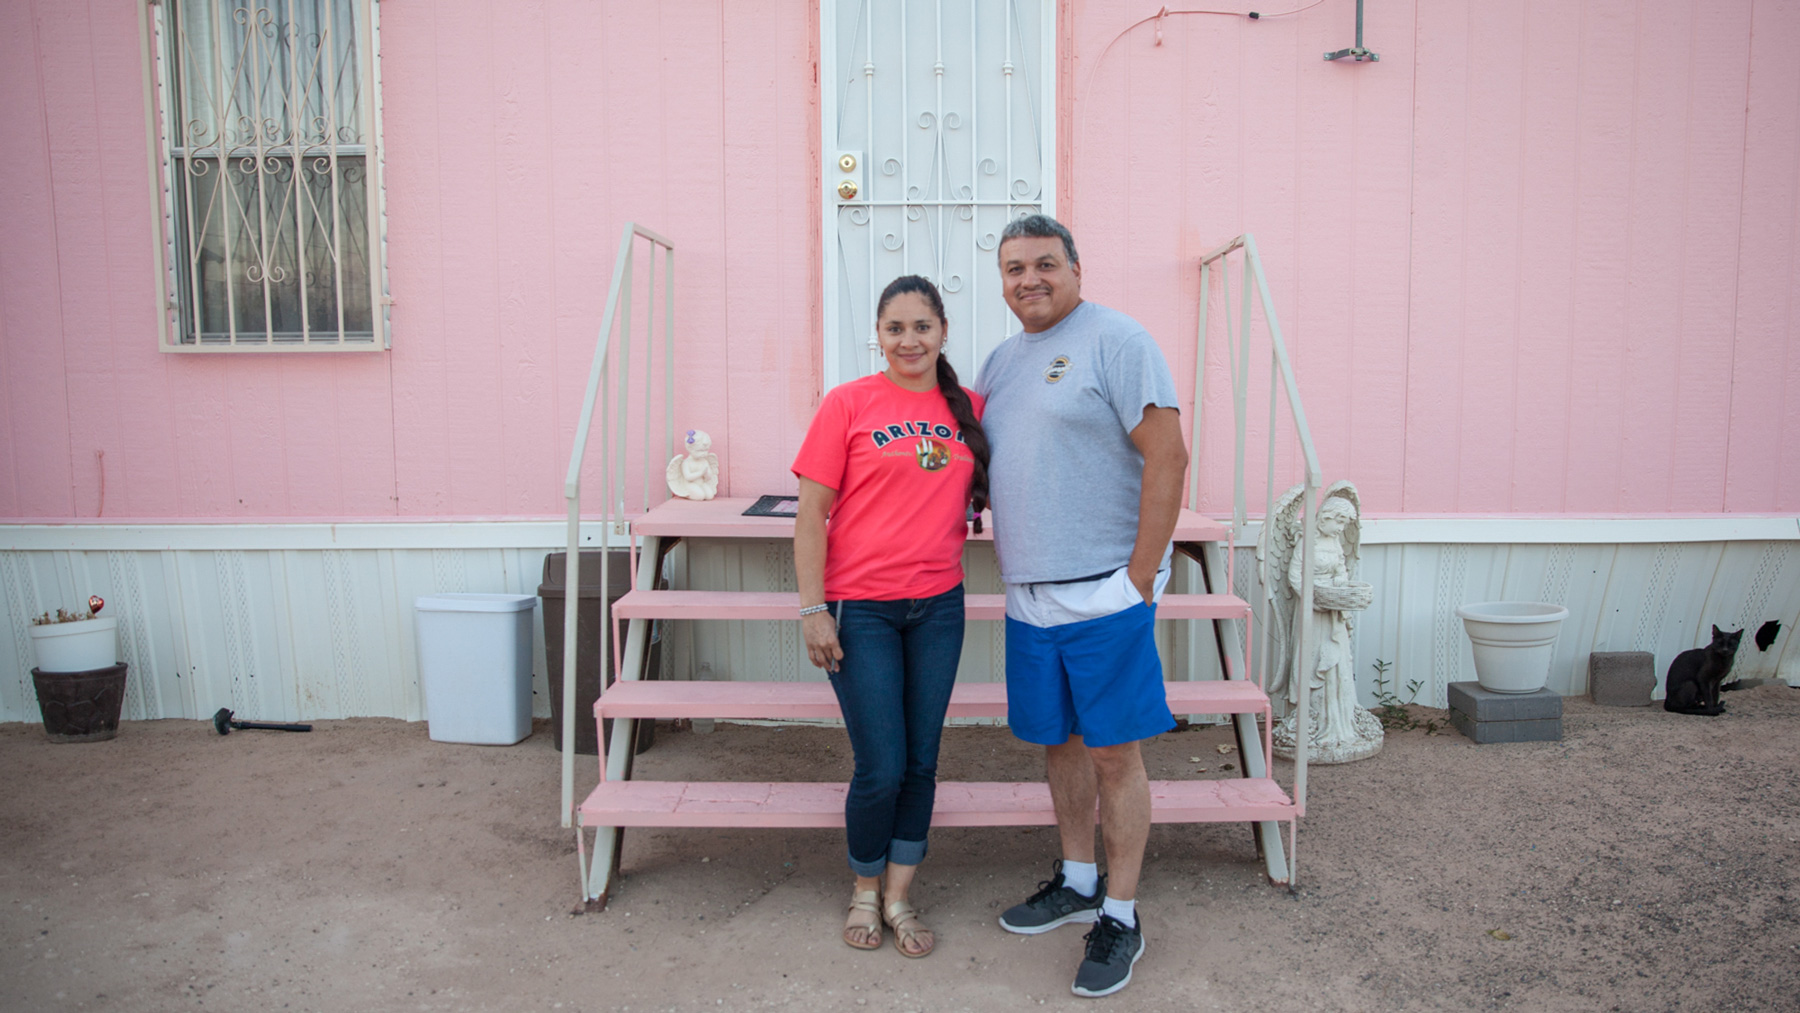 Cristina Morales and her husband, Rafael Martinez, said they don’t plan on moving from Horizon View Estates, a colonia in El Paso County, Texas. The colonia has no sewage treatment, and they said the tap water occasionally comes out brown. (Maria Esquinca/News21)